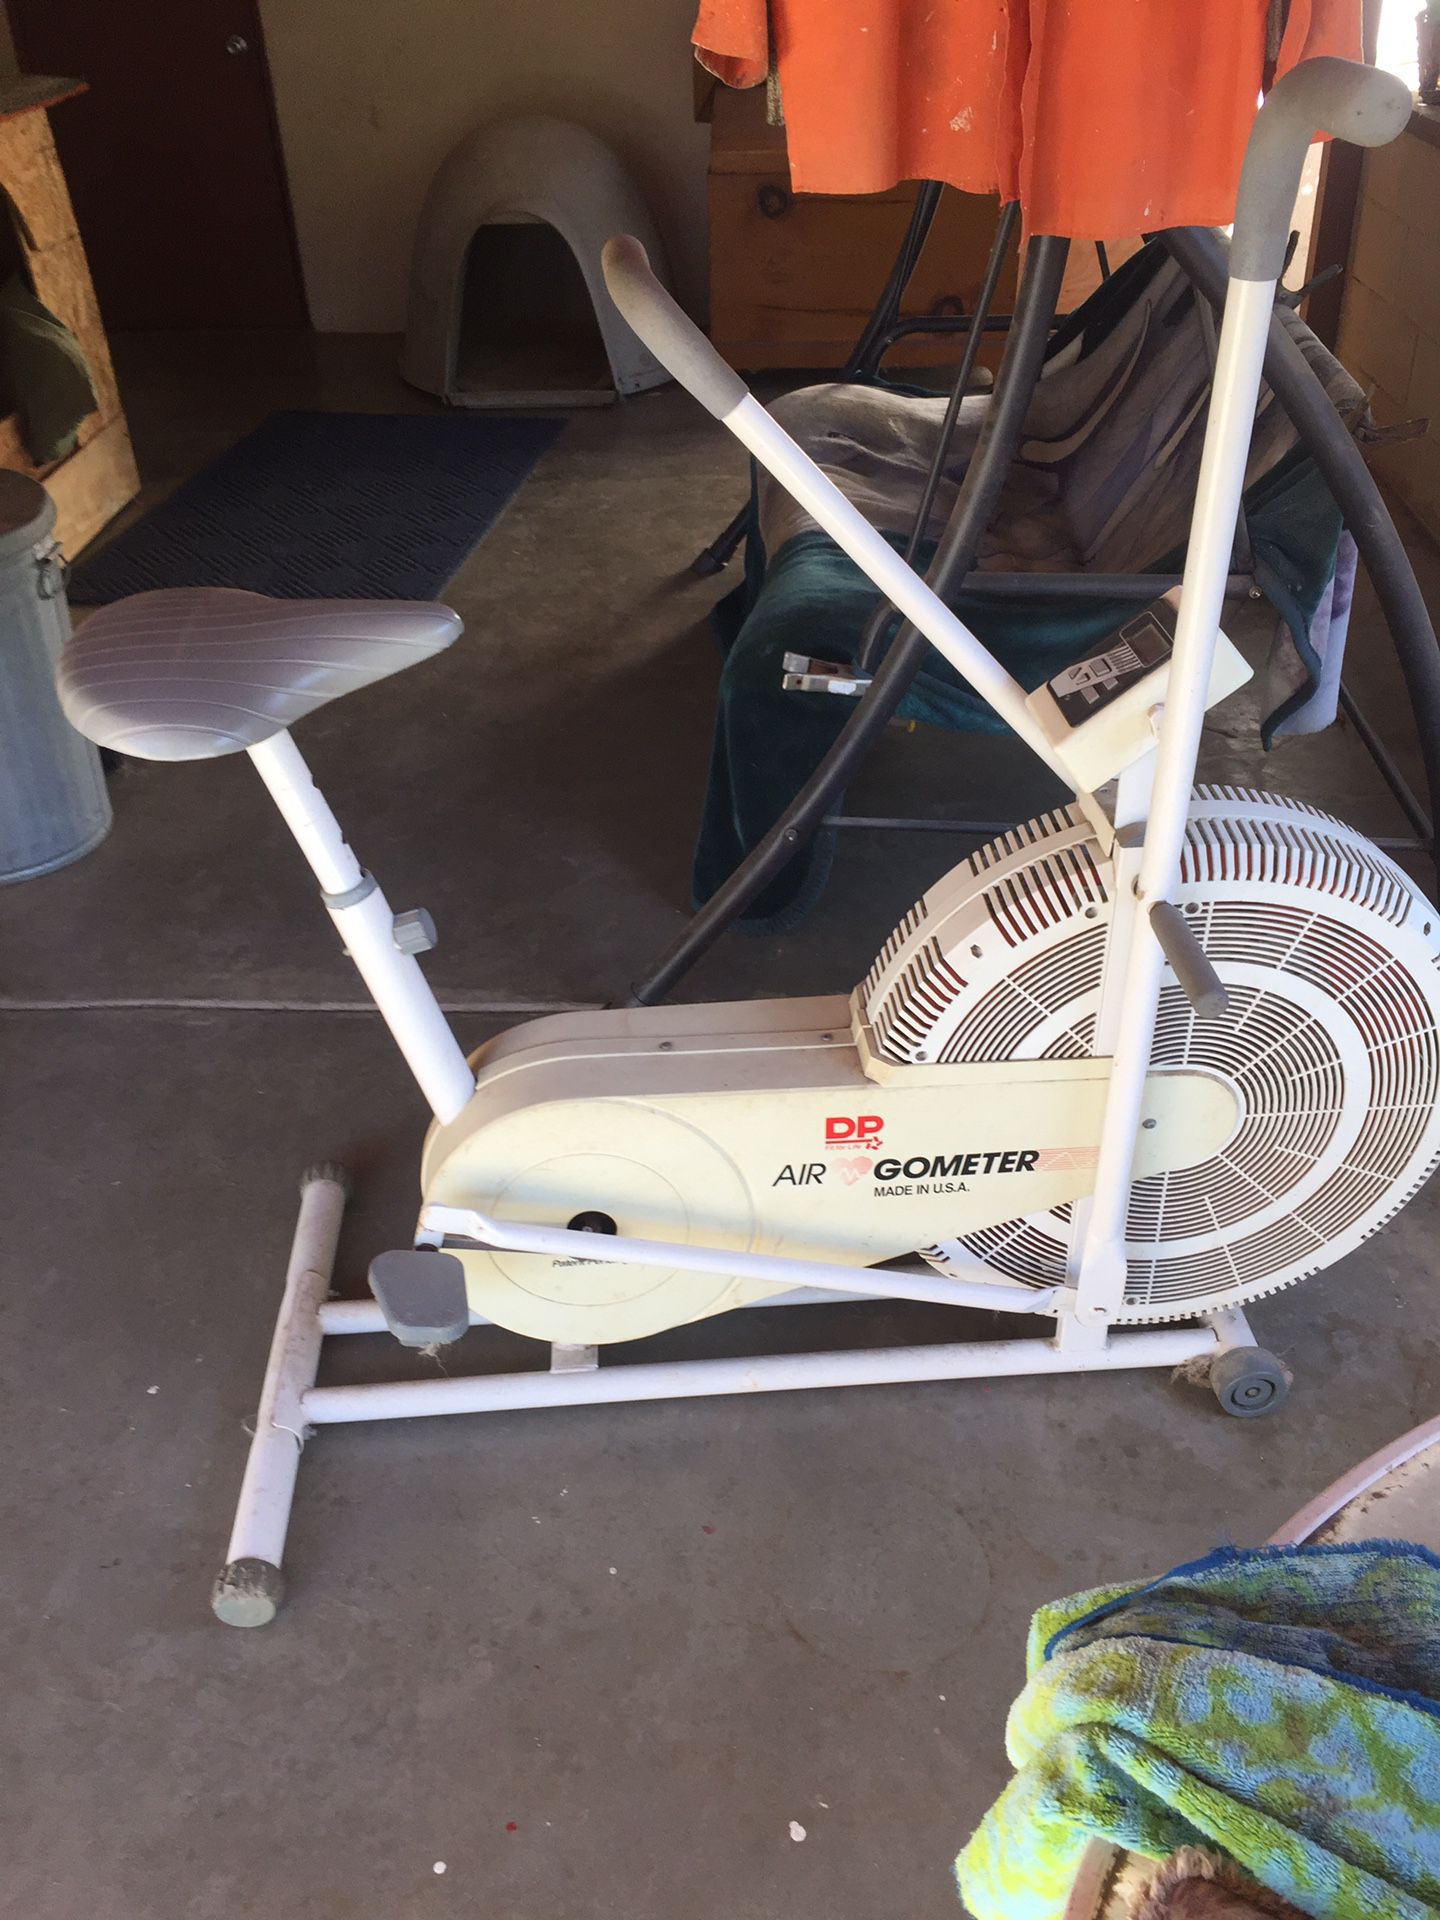 Dual action exercise bike